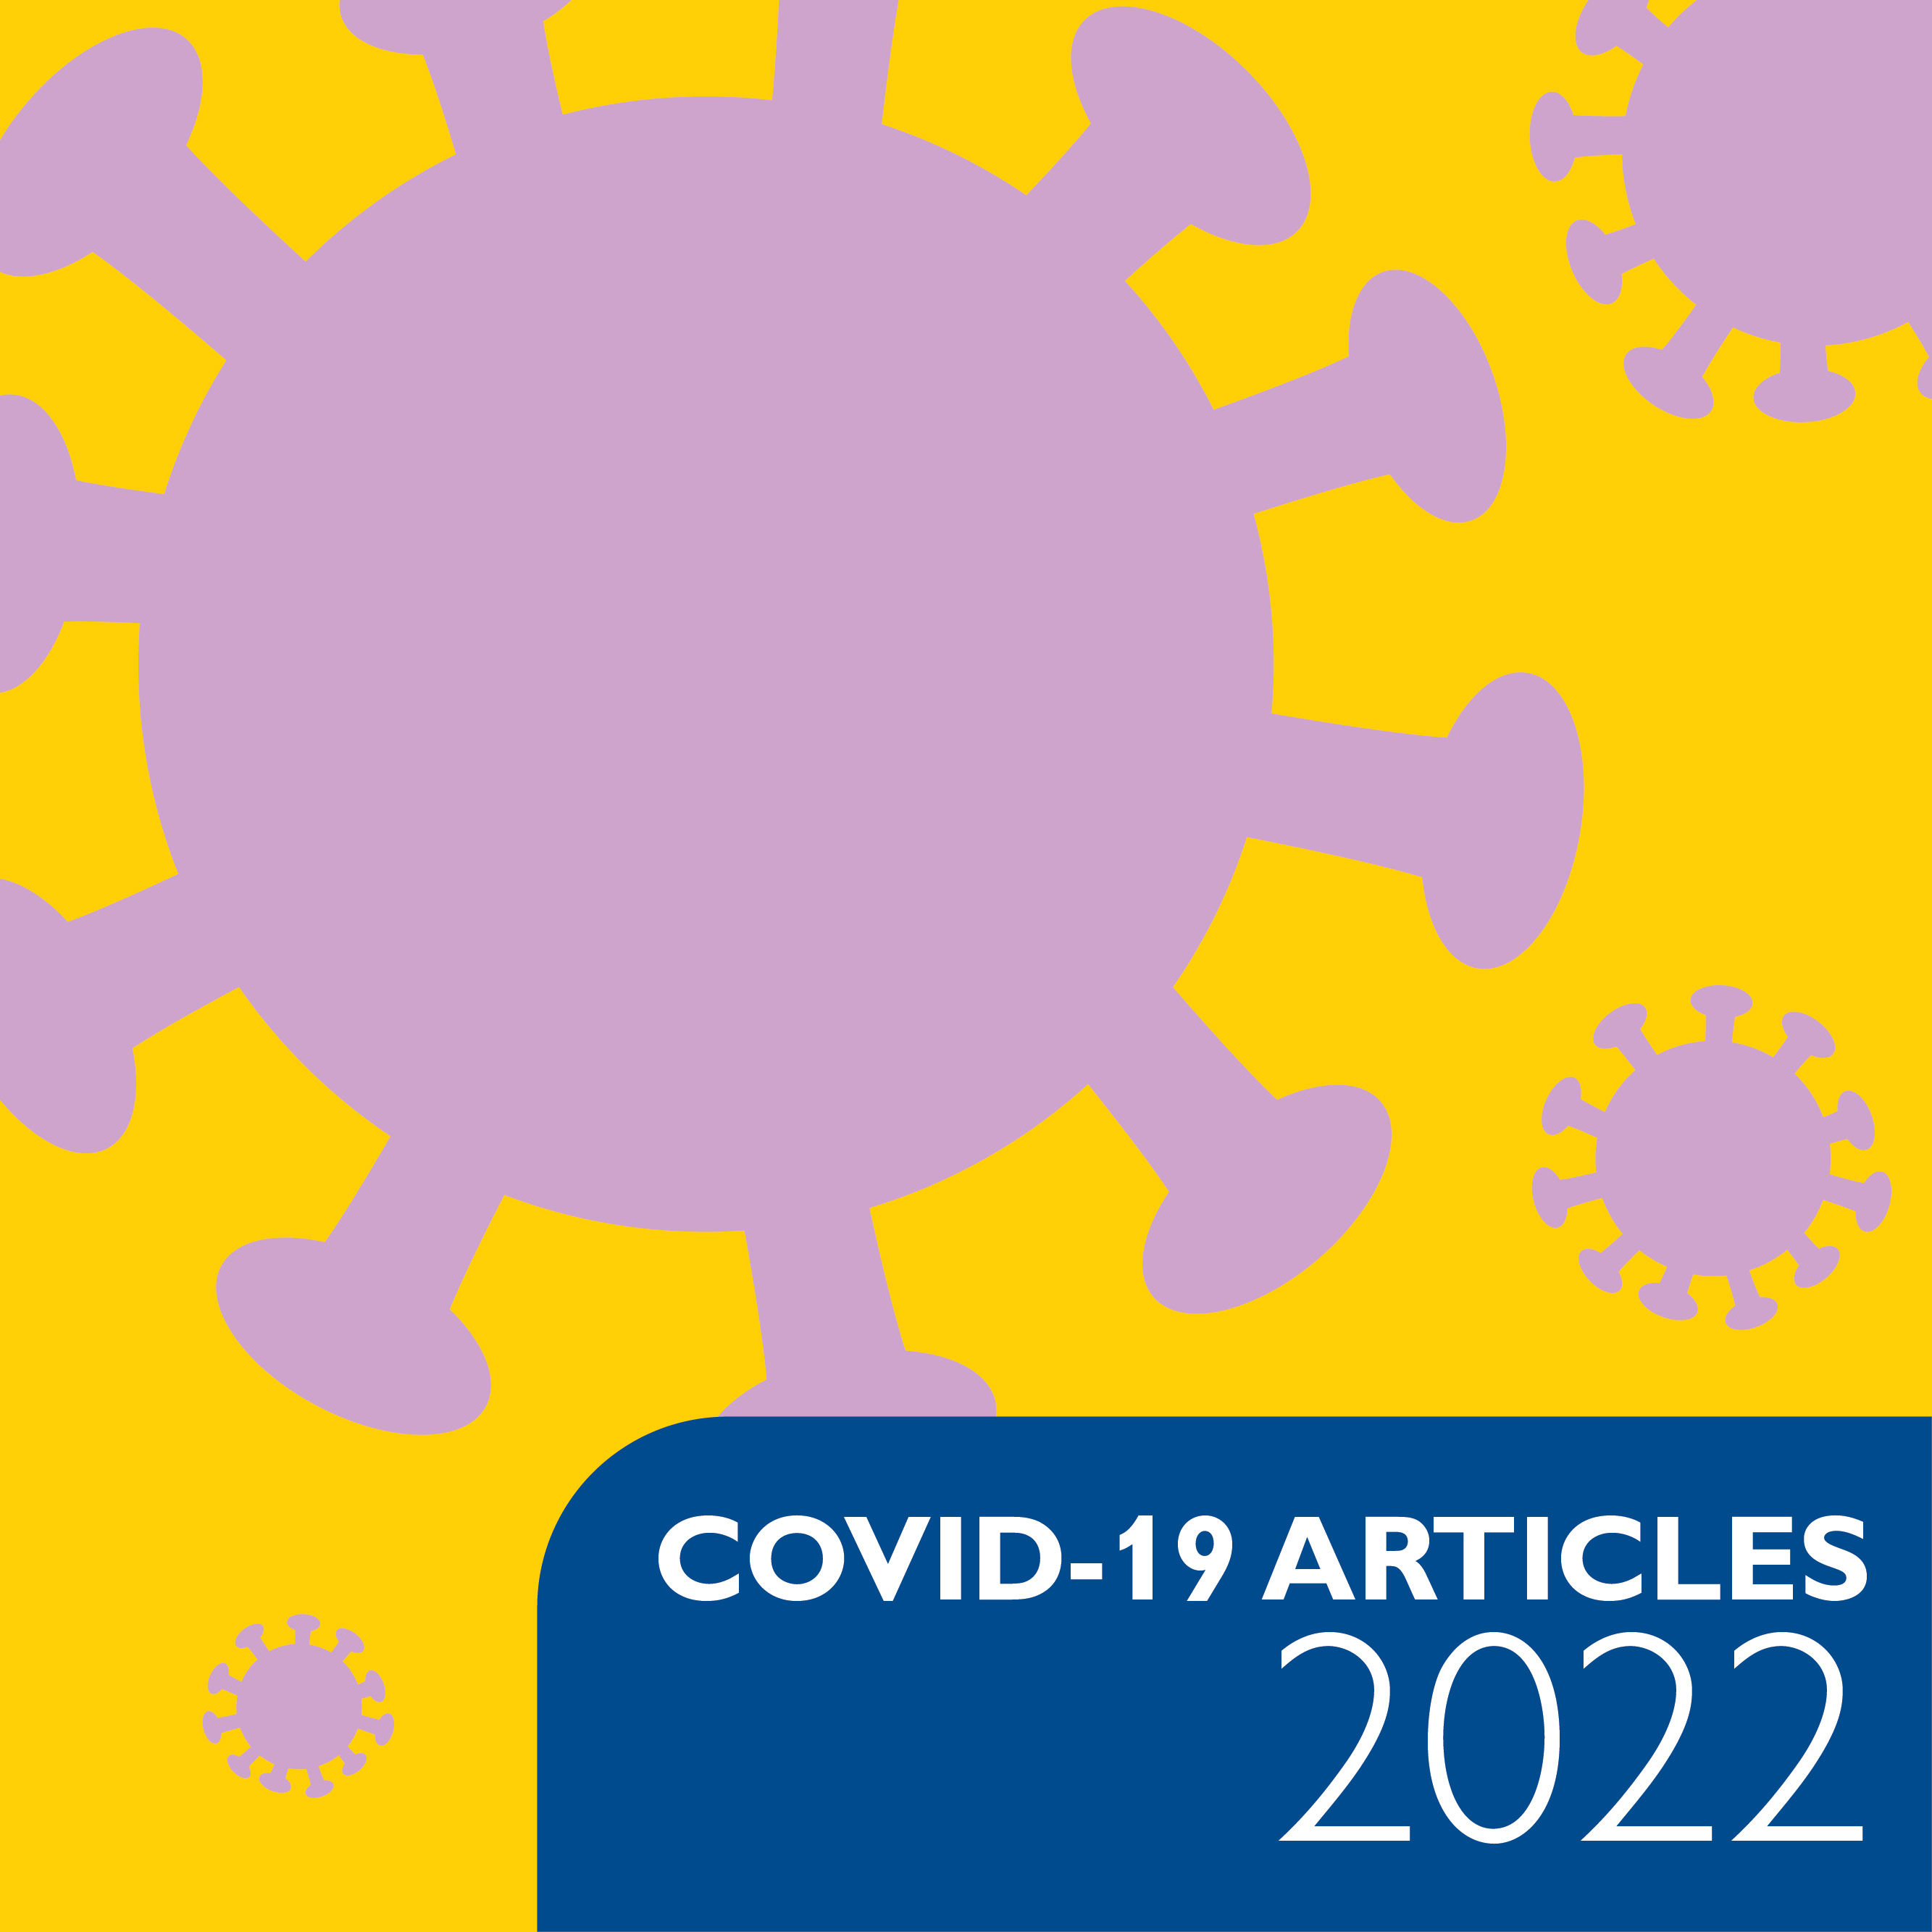 An illustration of a covid protein on a yellow background.